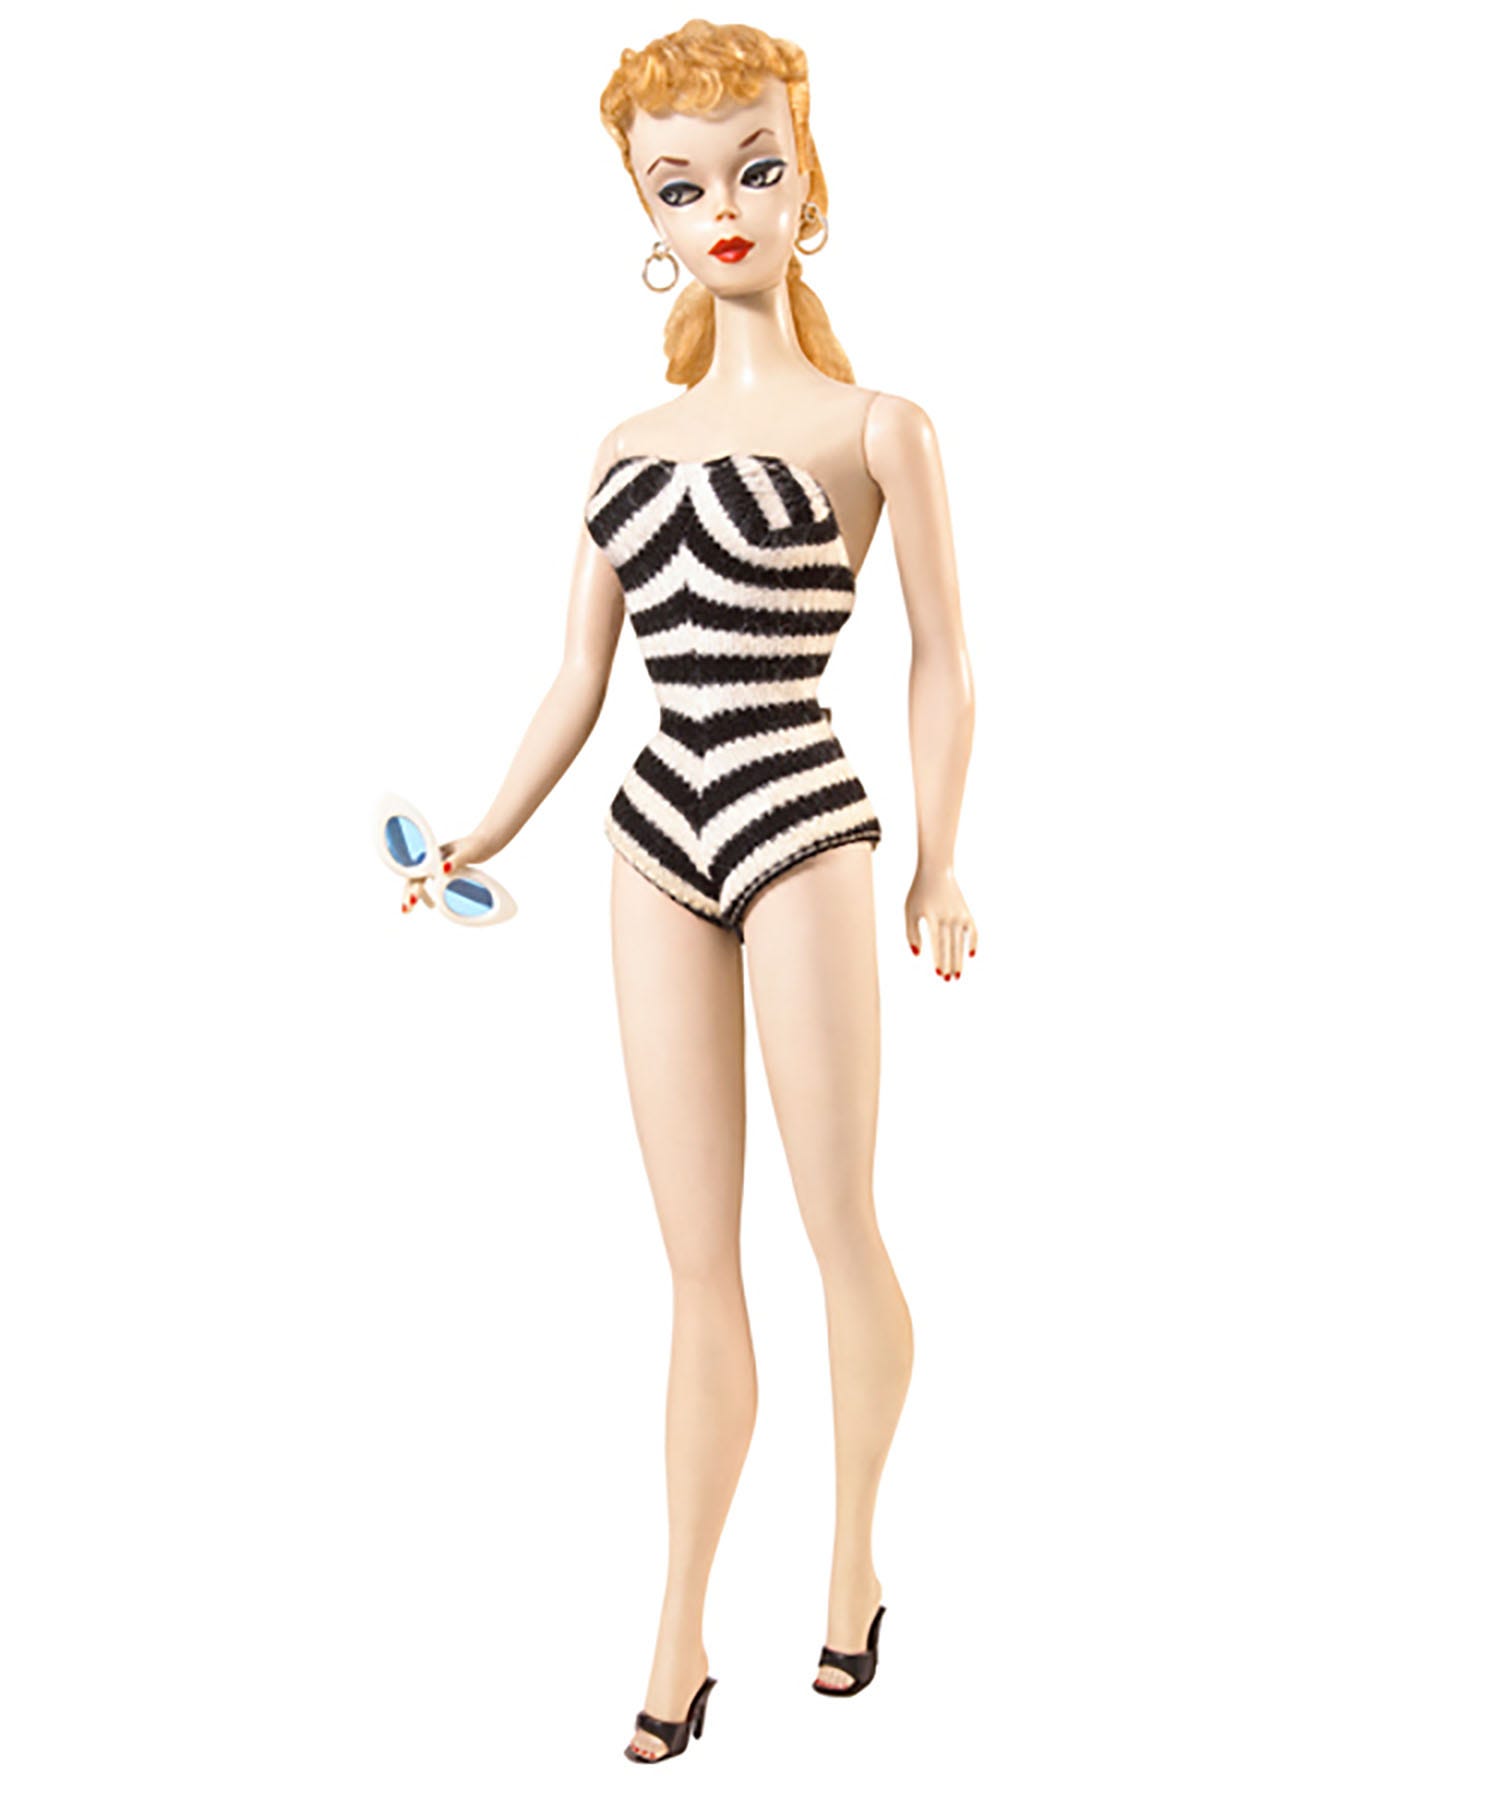 where to sell barbies online